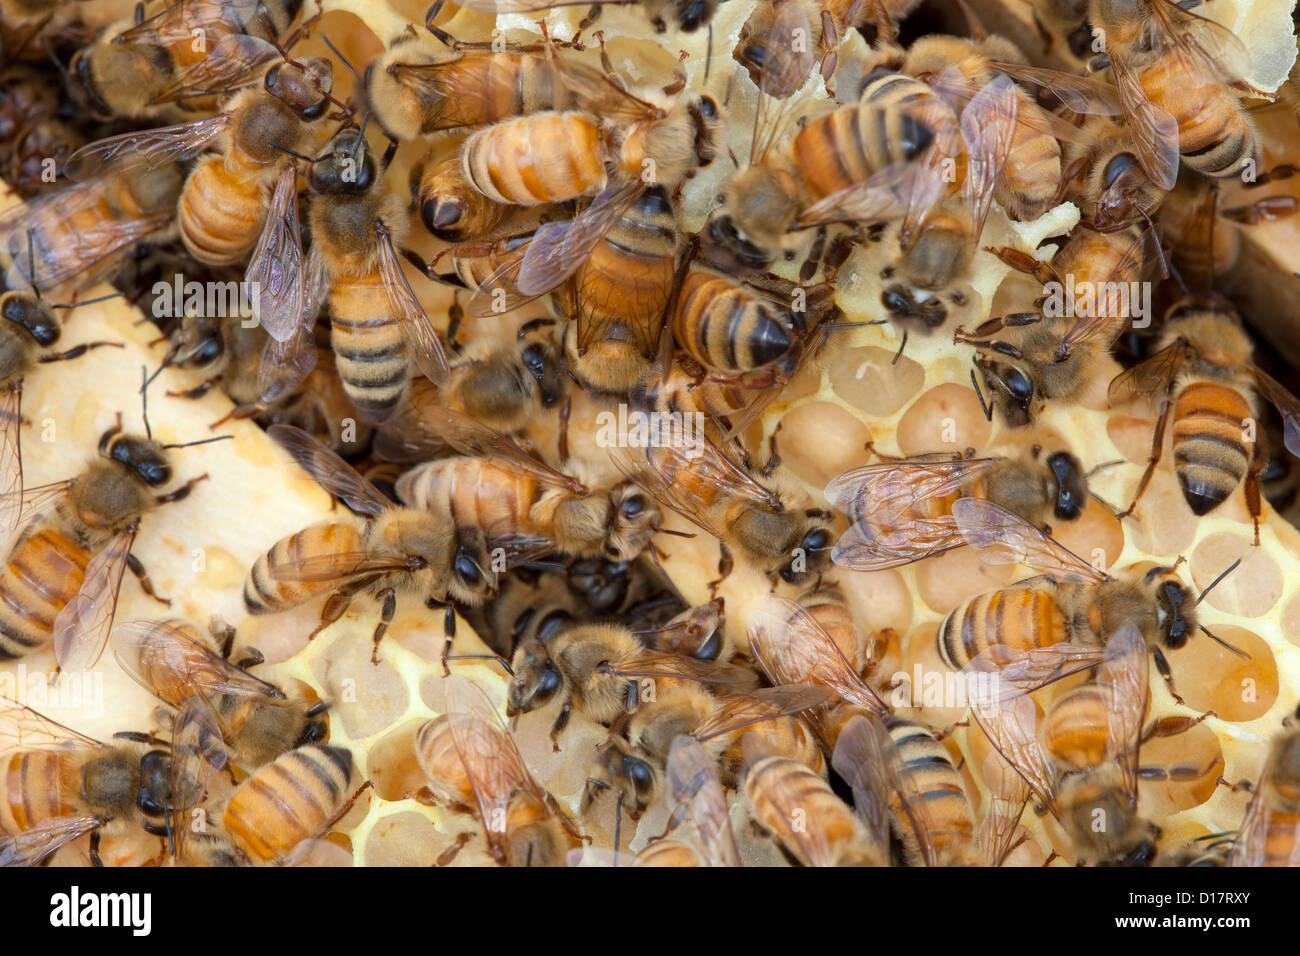 A colony of bees in a beehive. Stock Photo